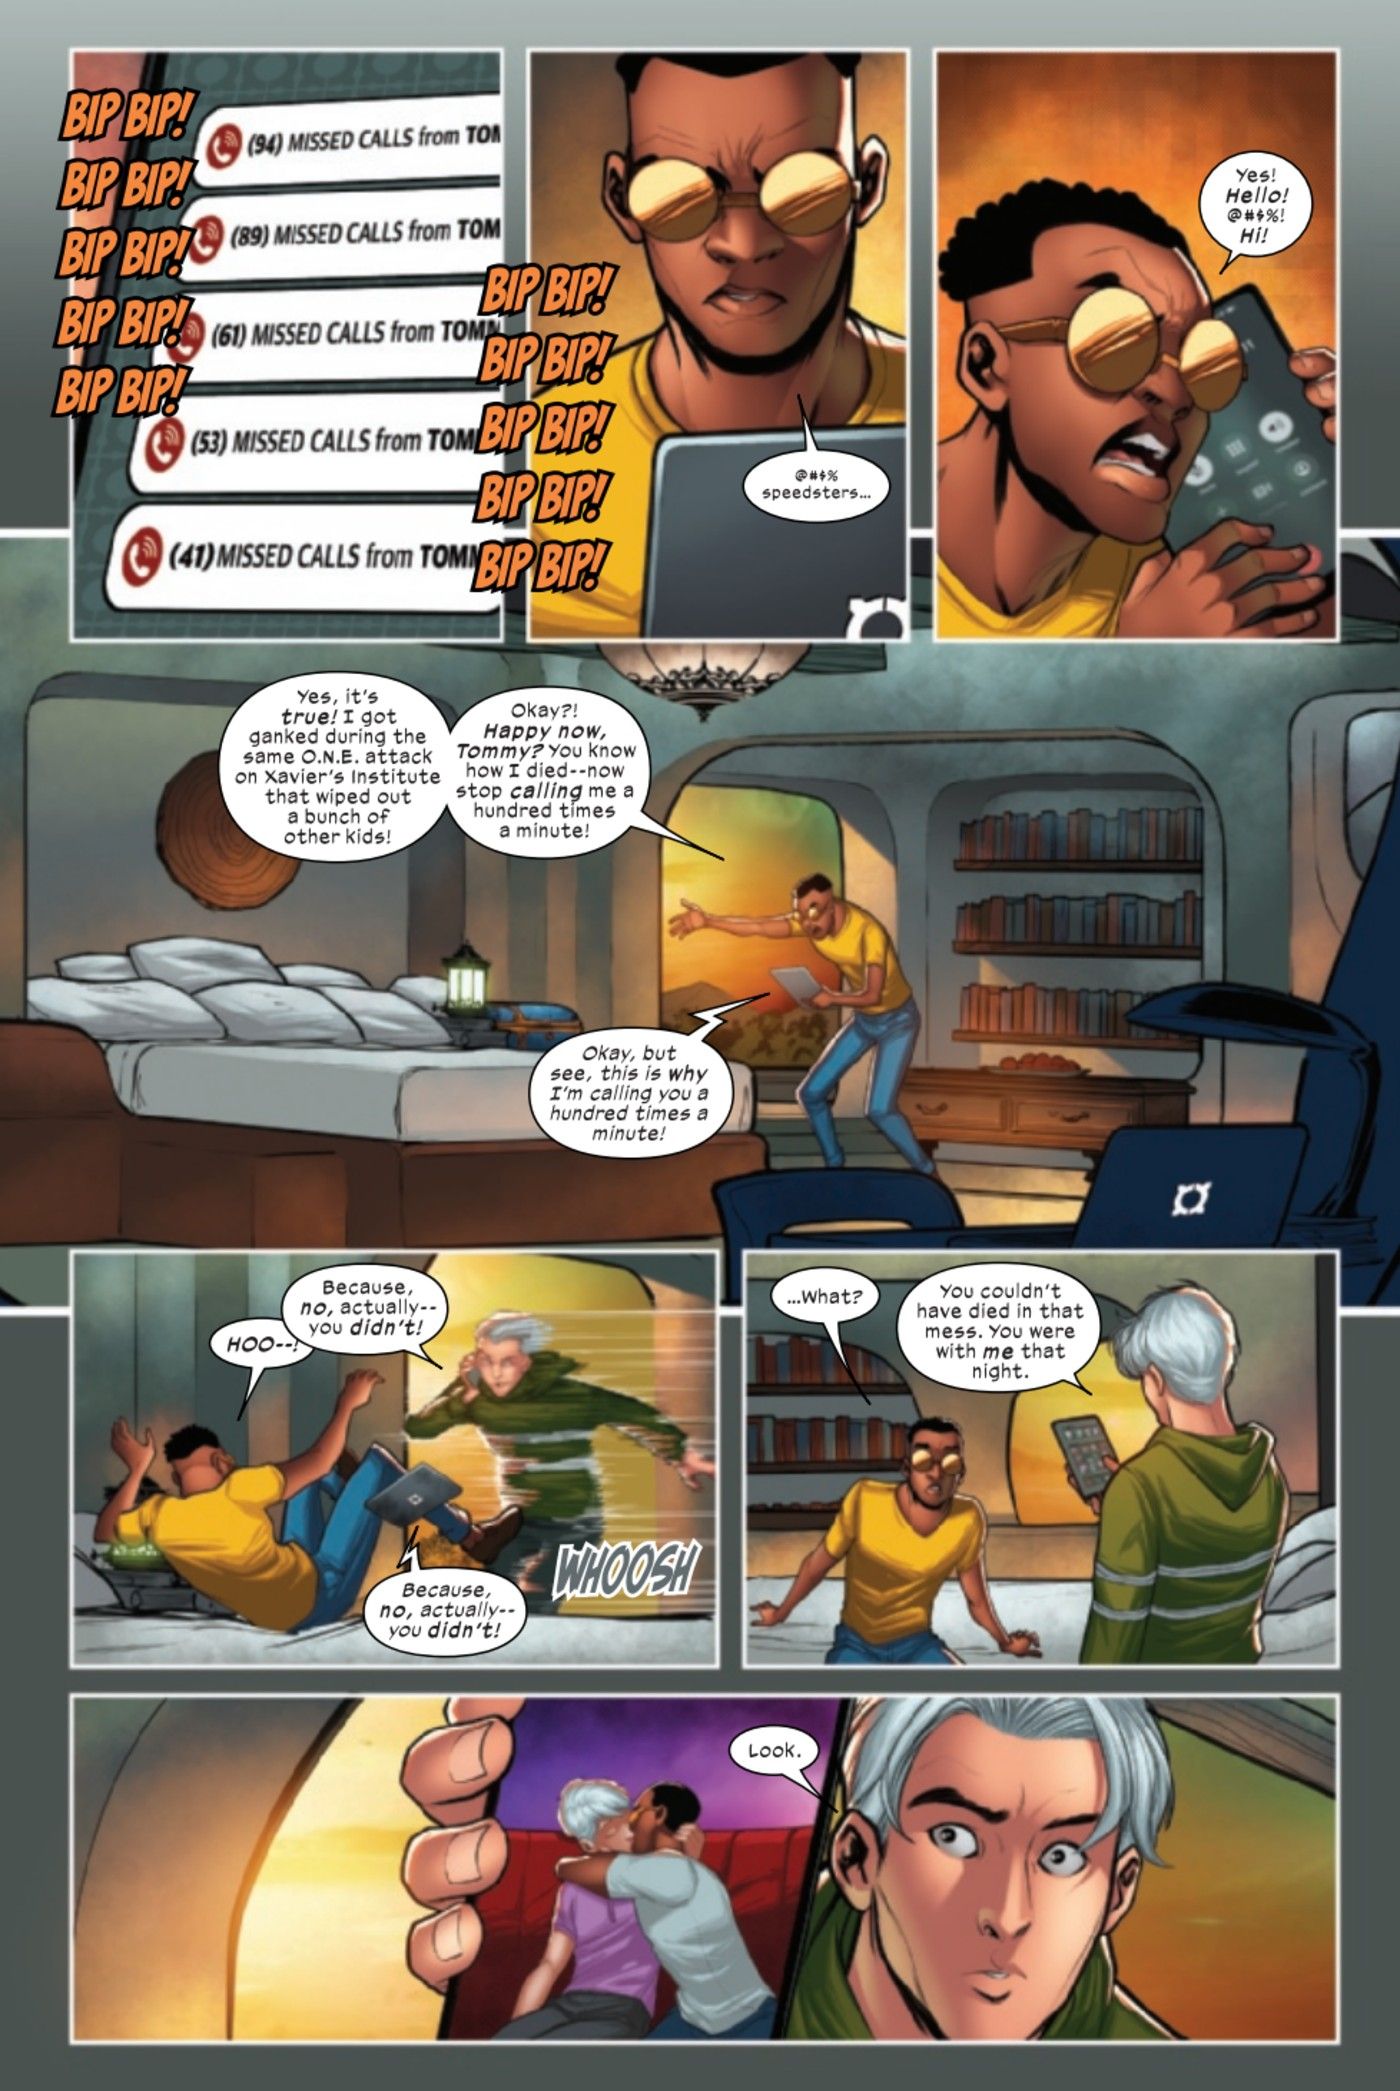 X-Factor 7 preview page 1